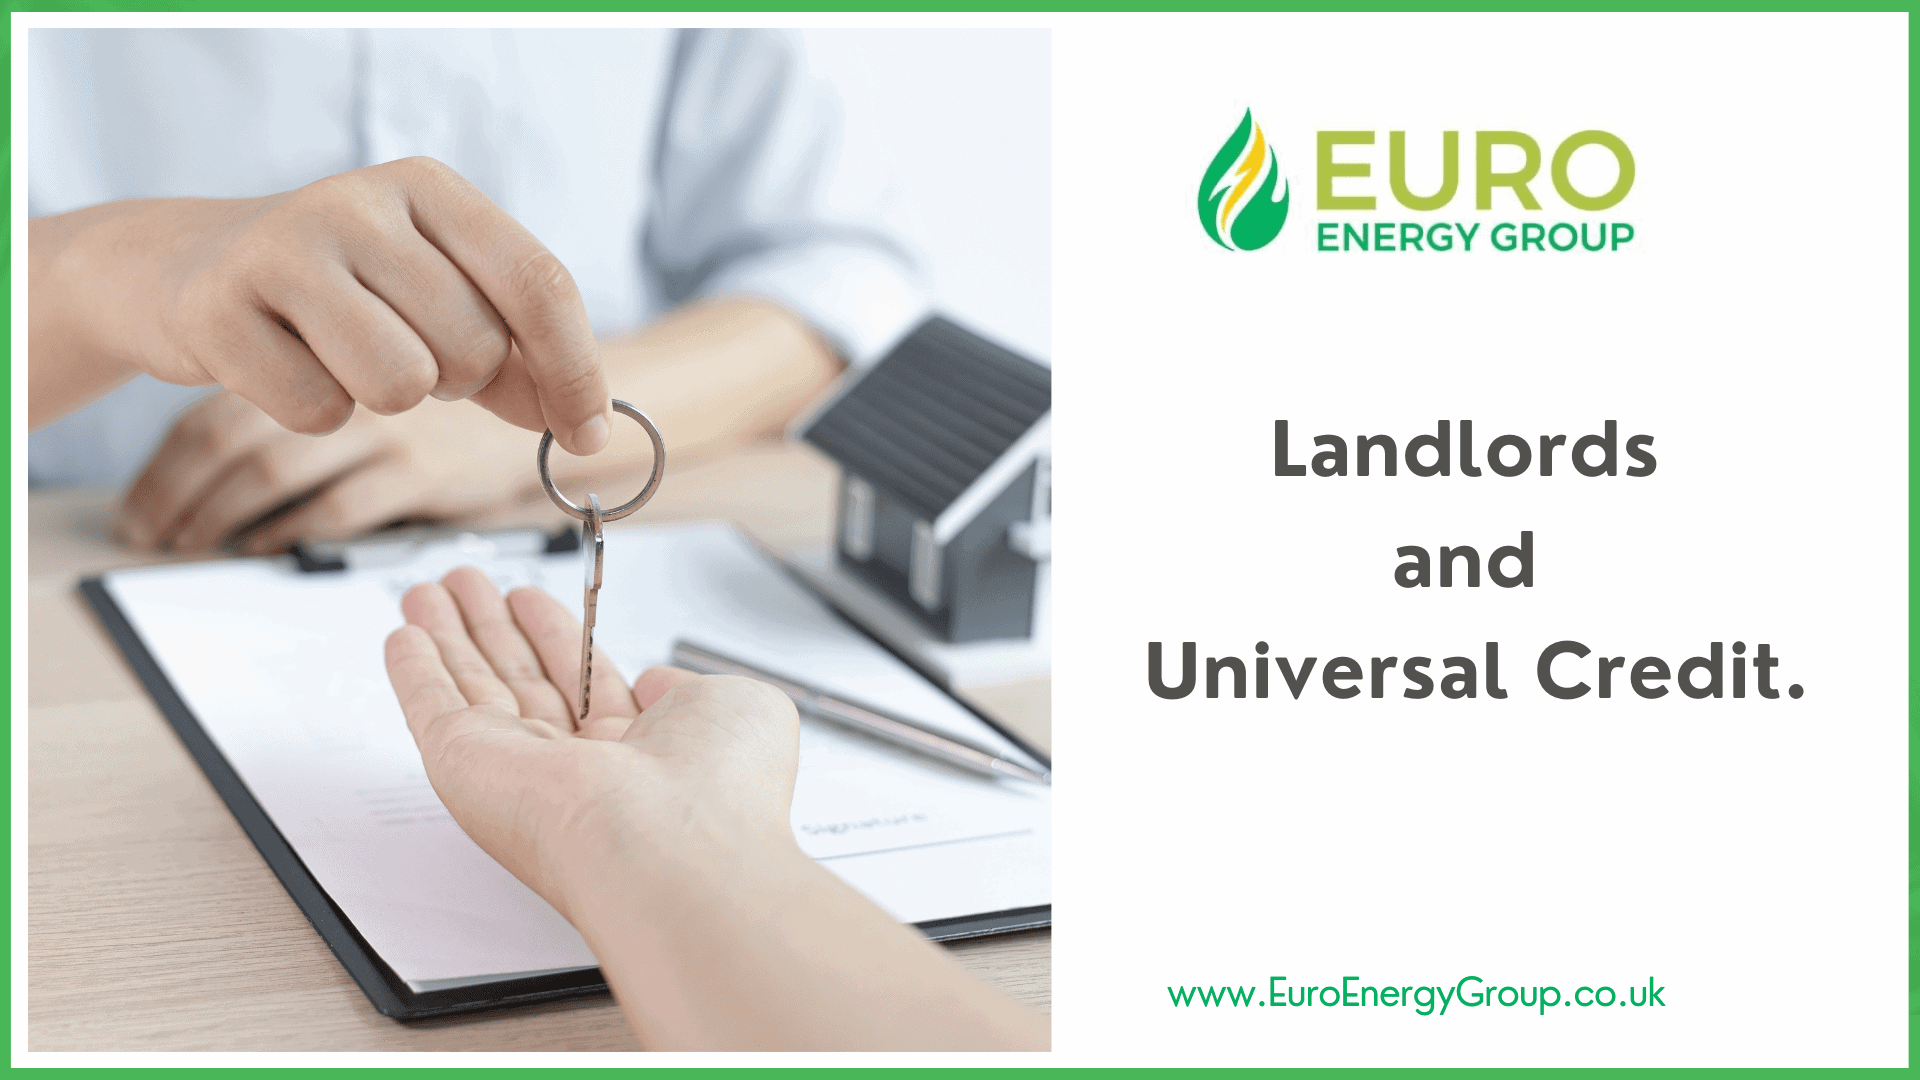 Euro Energy Group better cater to both landlords and tenants ensuring that the ECO4 program